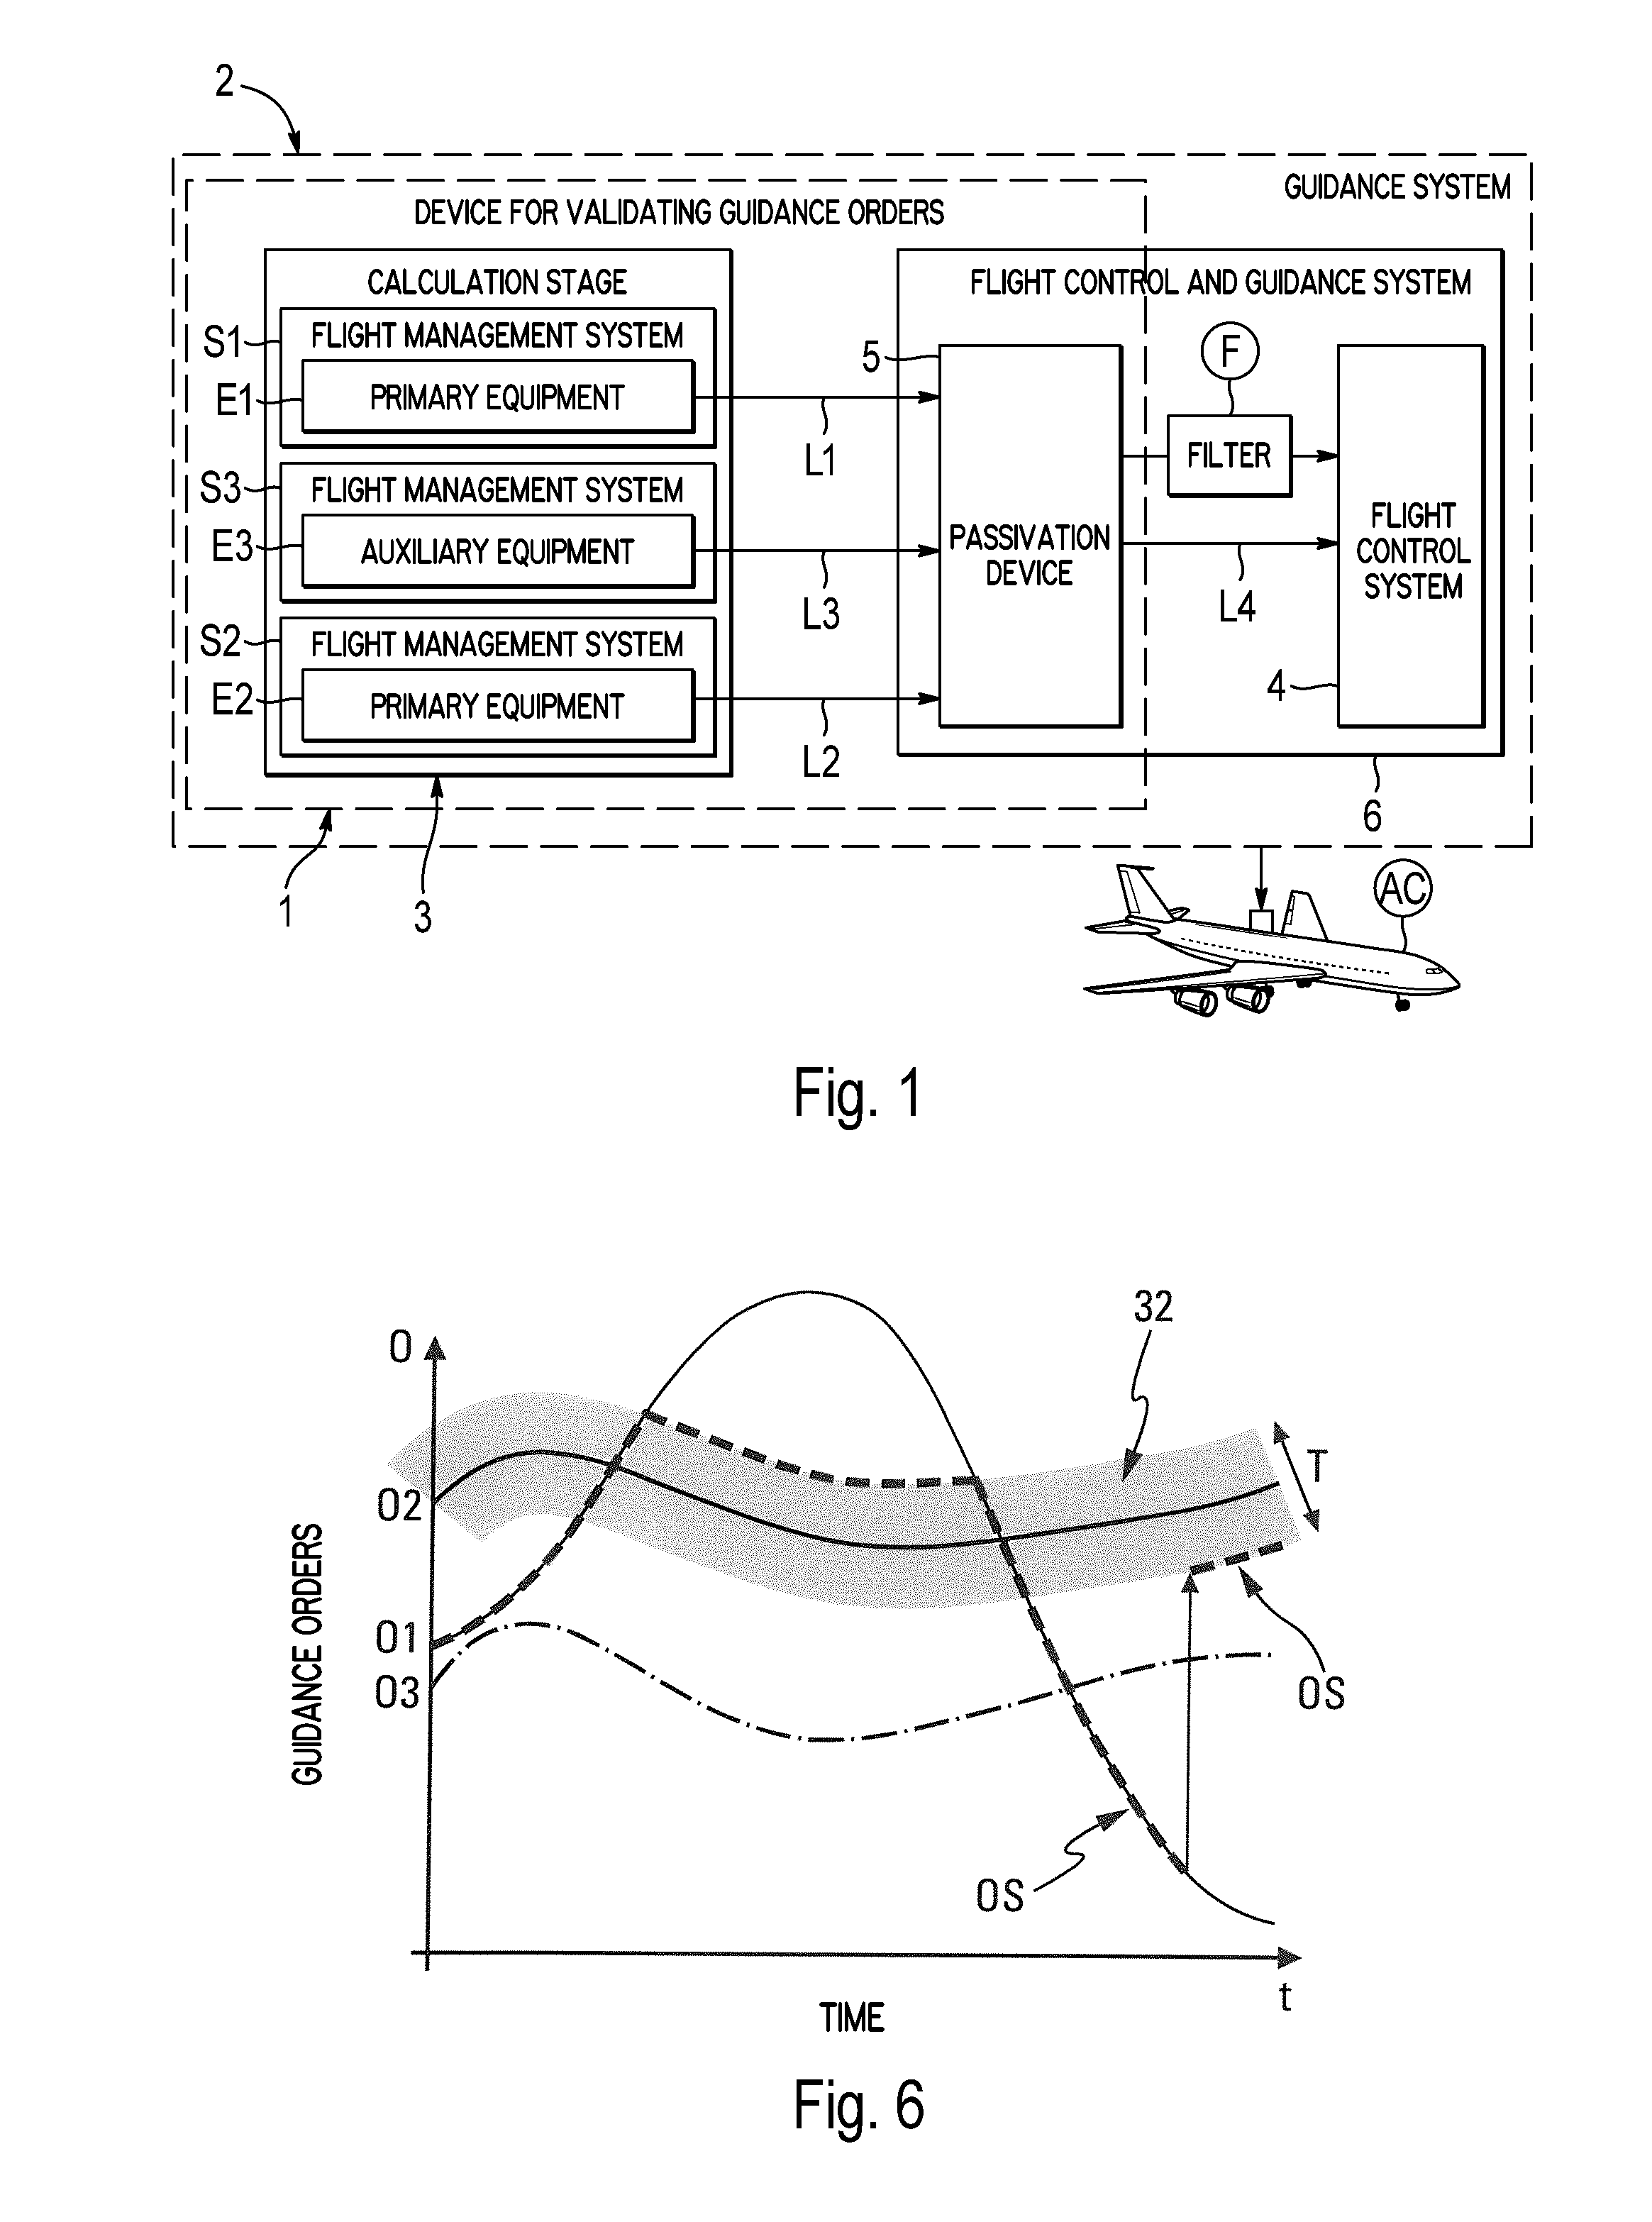 Method and device for the passivation of guidance orders of an aircraft